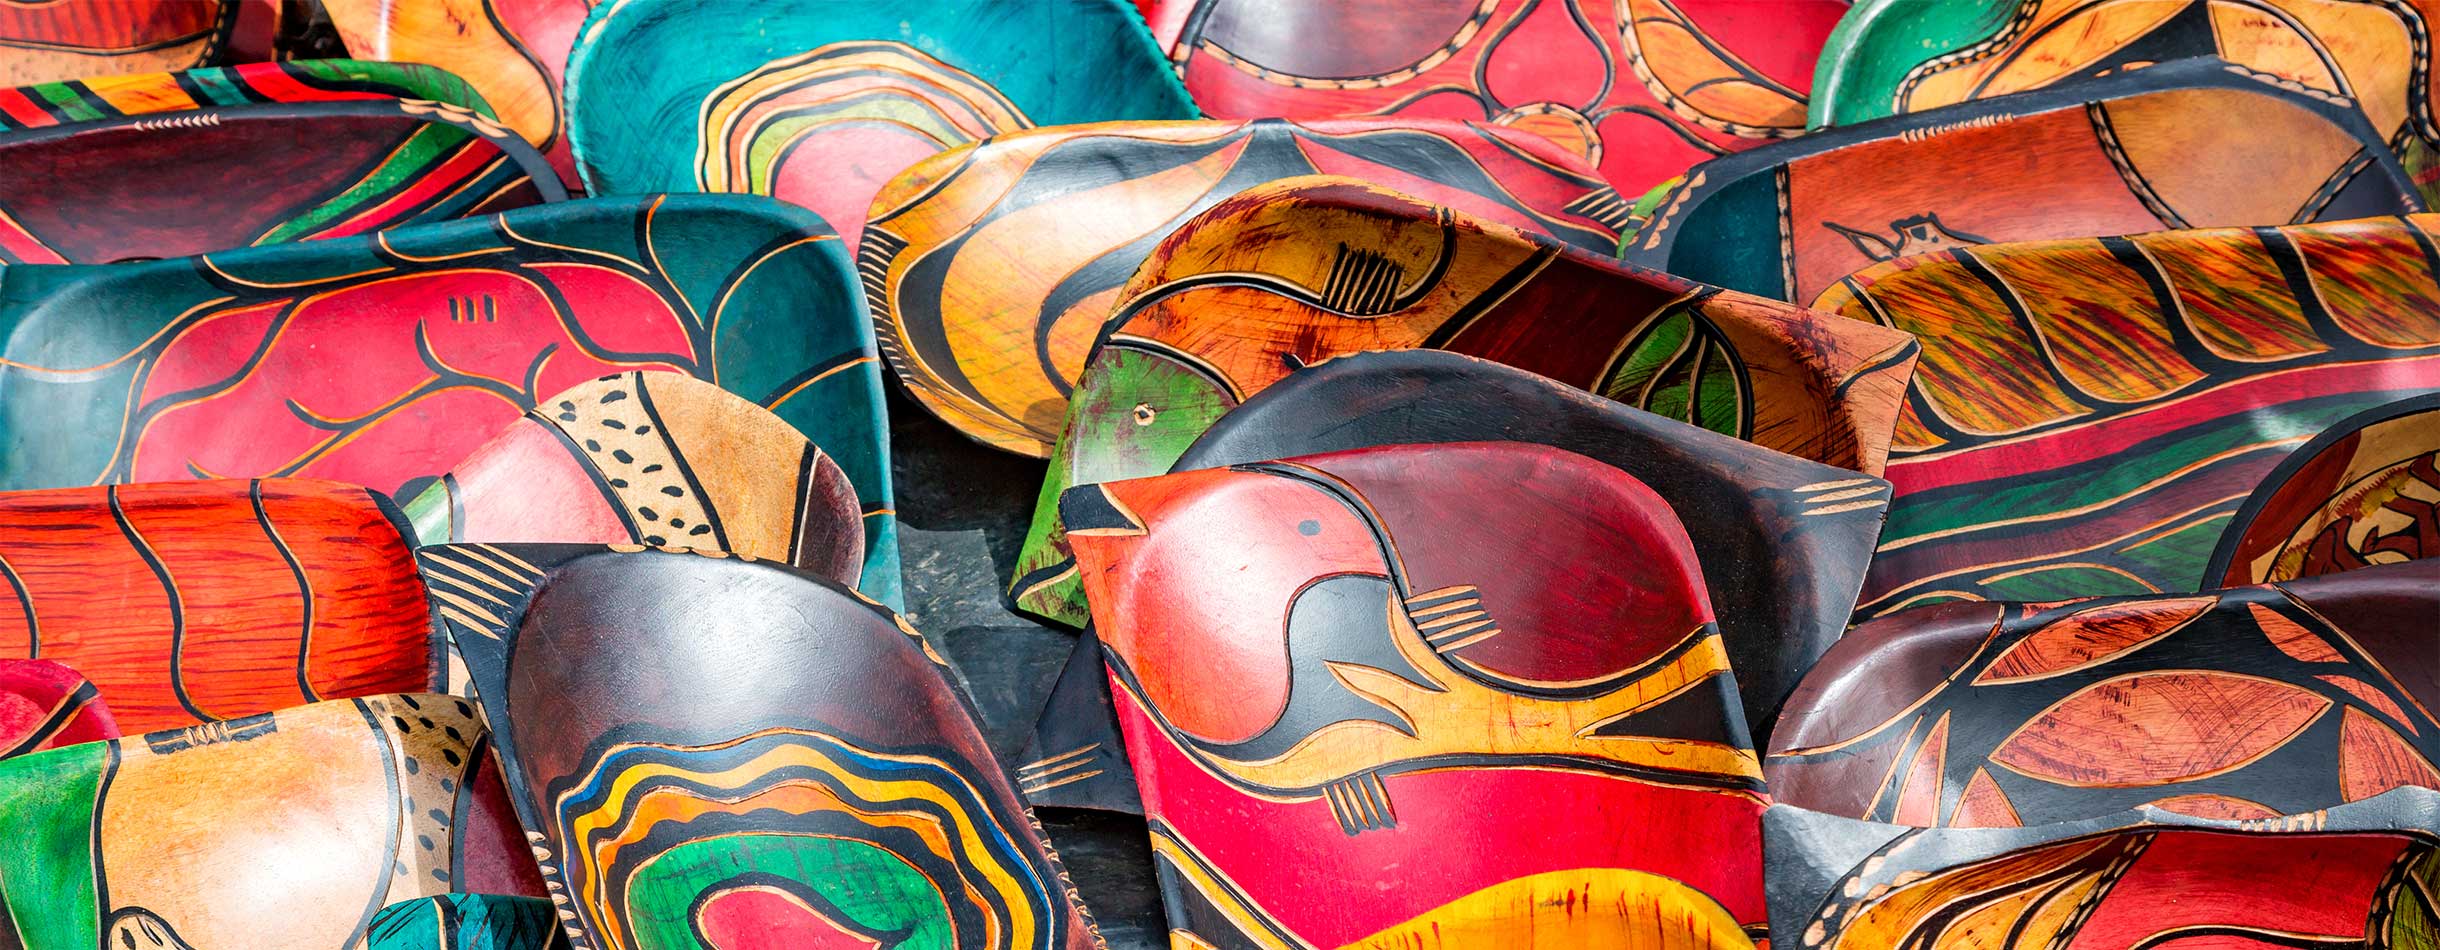 Rows of carved, hand painted wood bowls at a market in South Africa.